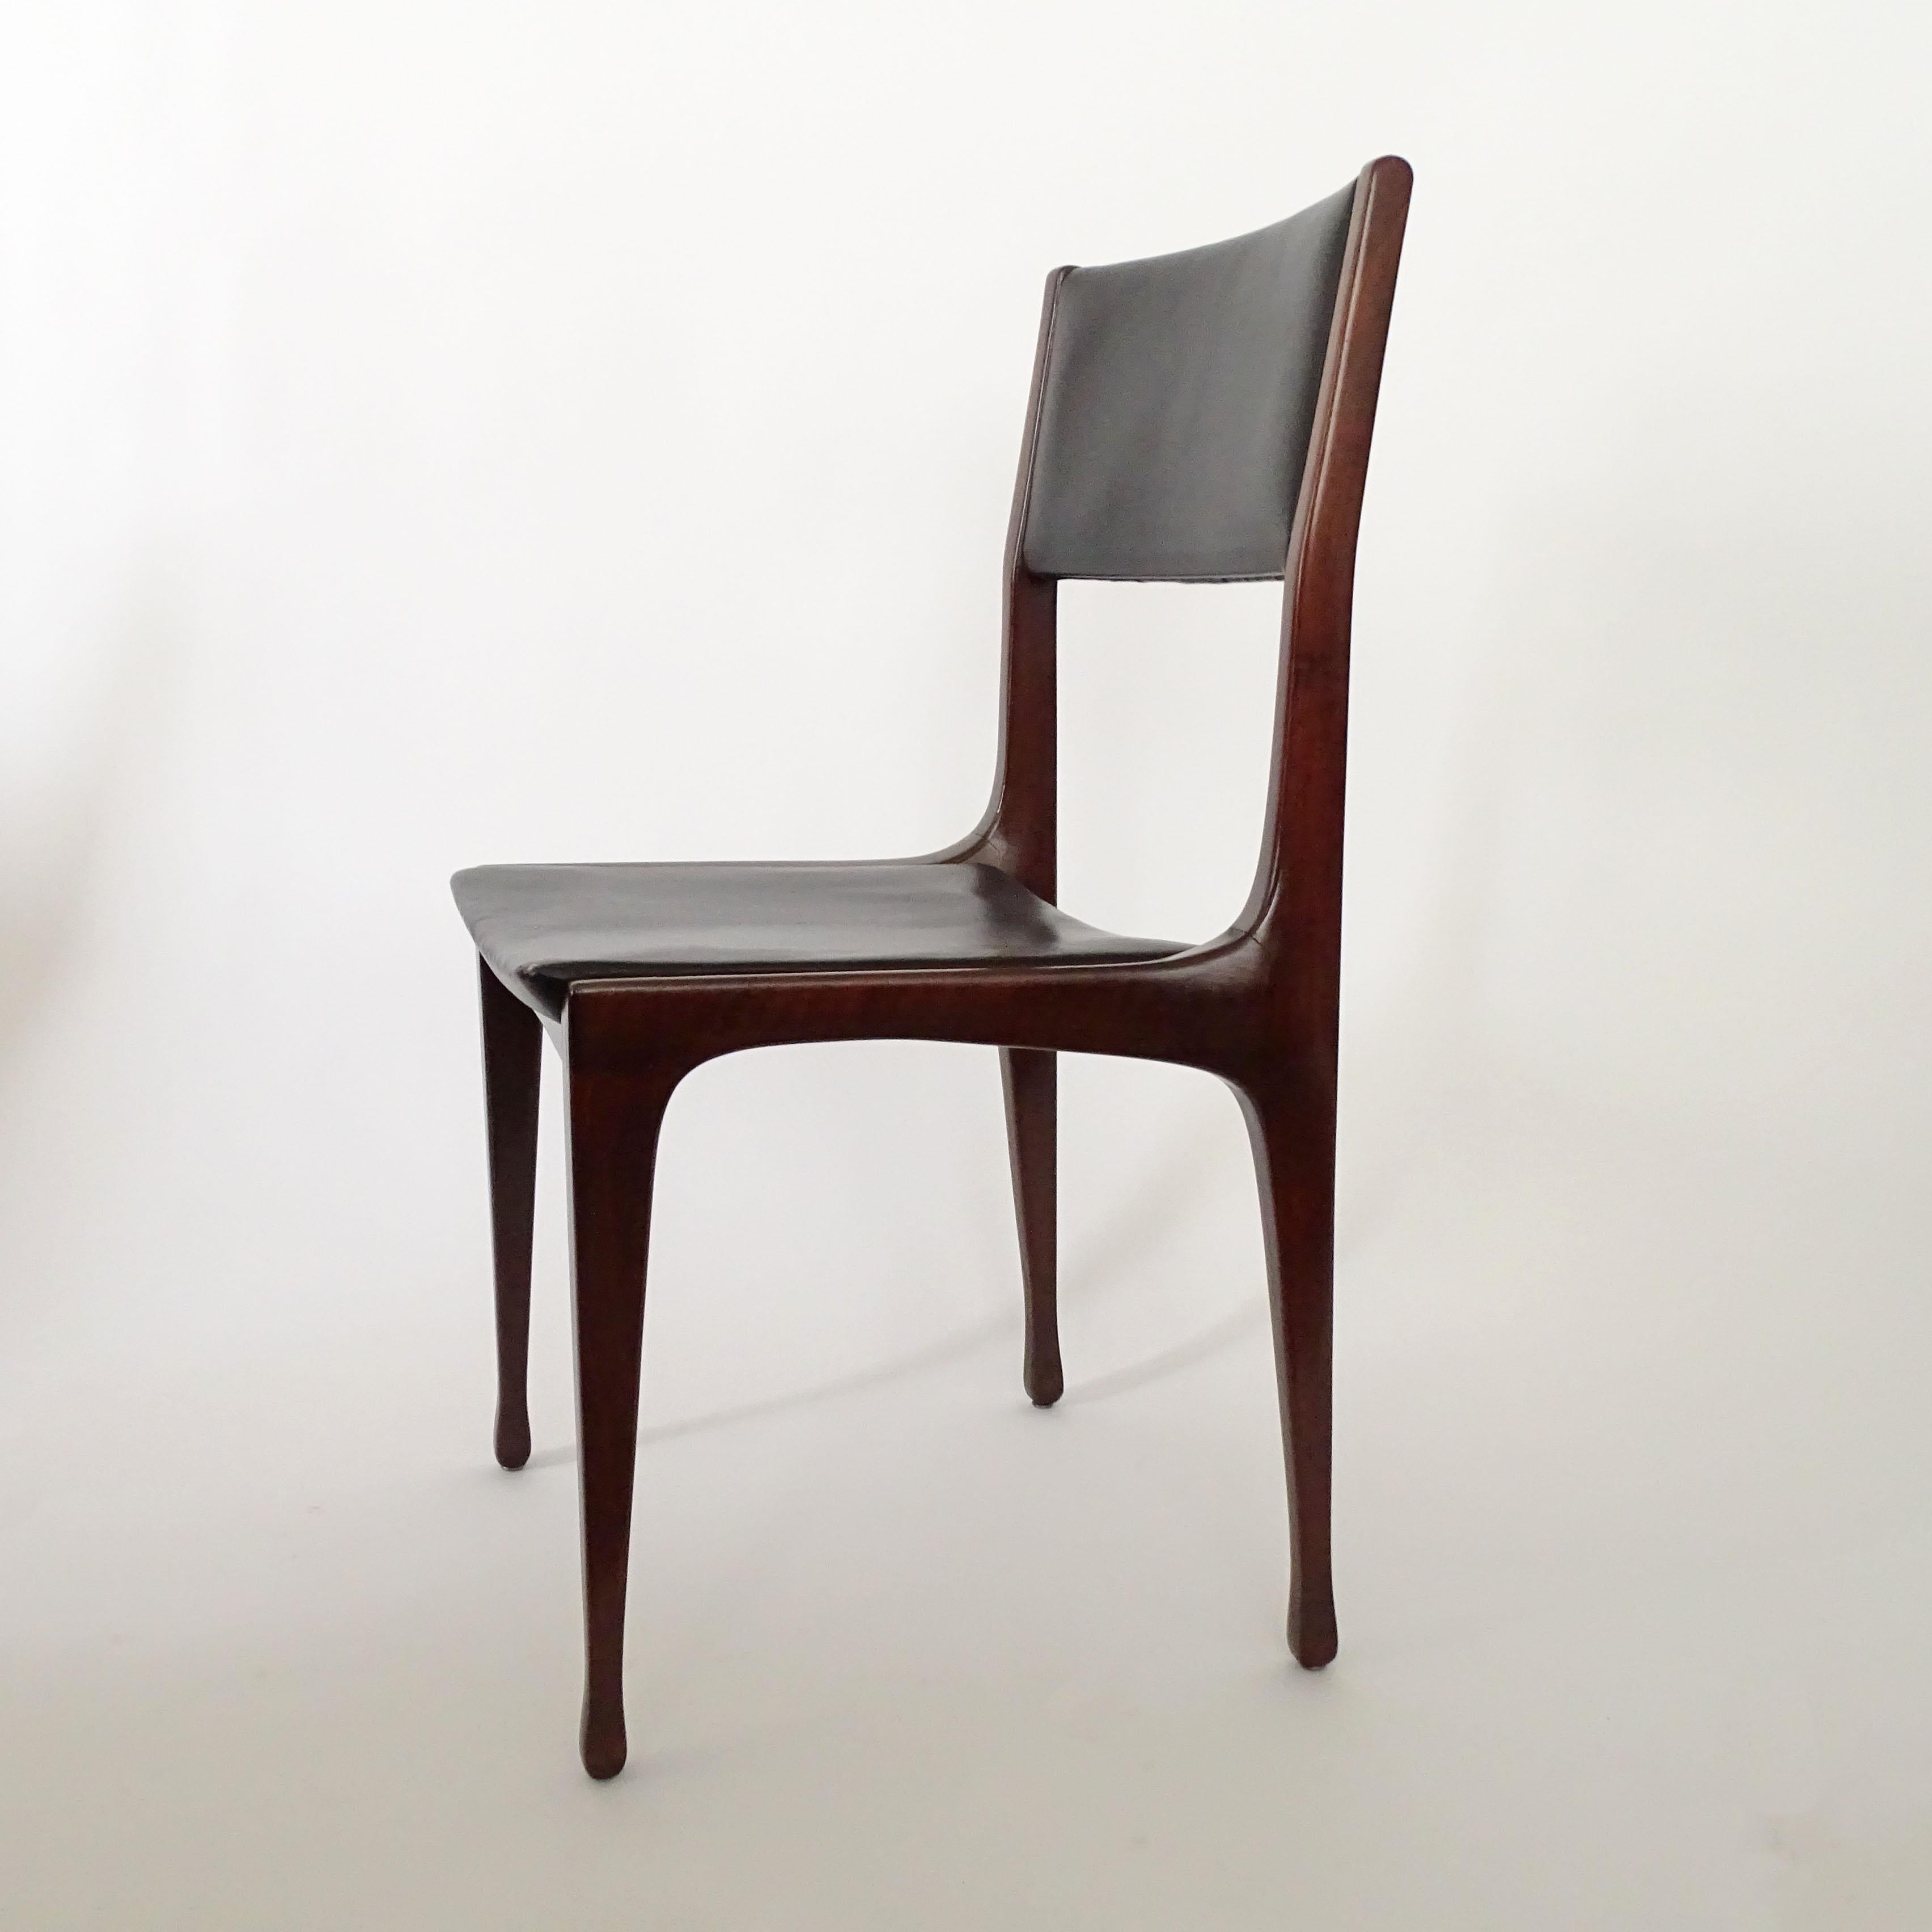 Mid-20th Century Carlo de Carli Set of Six Dining Chairs for Cassina, Italy, 1958 For Sale